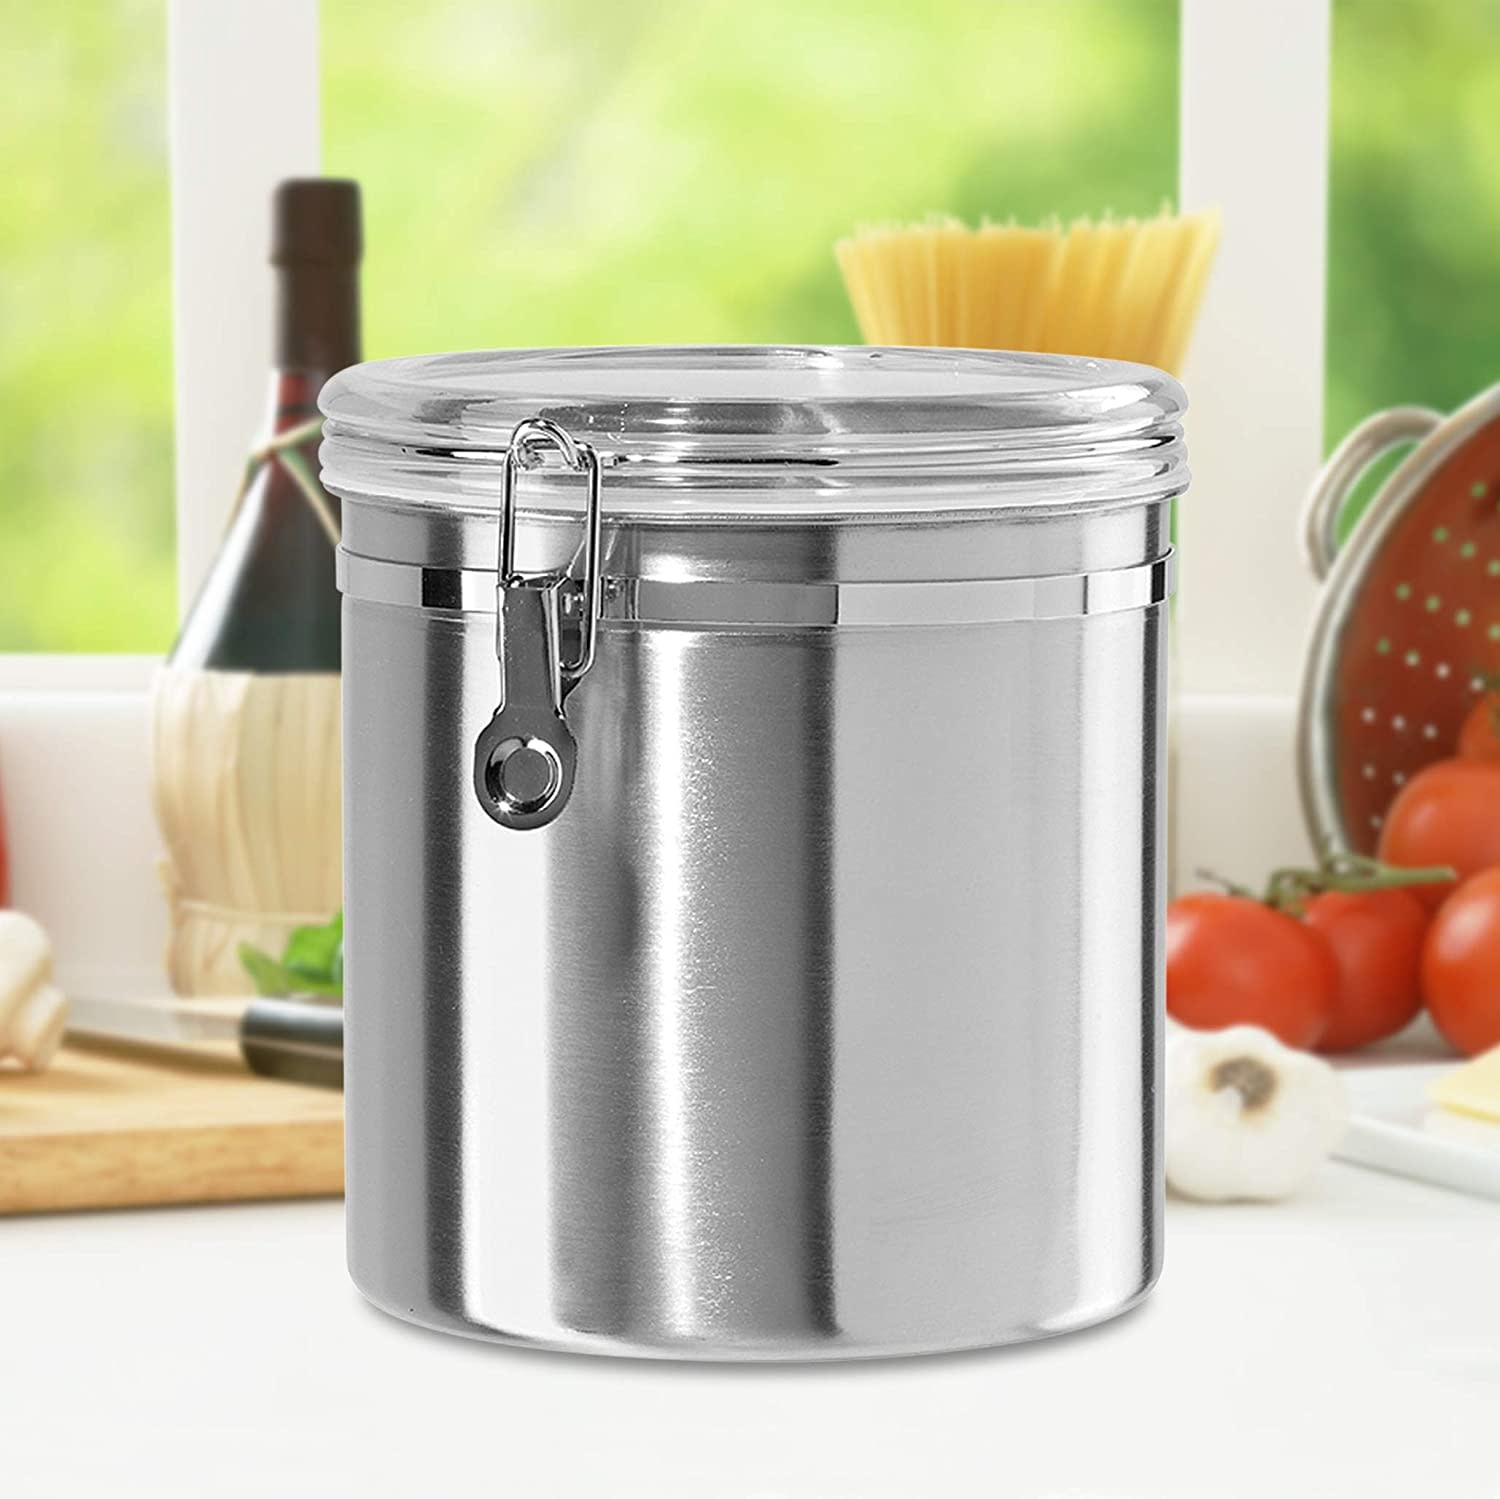 OGGI Stainless Steel Canister 62oz - Airtight Clamp Lid, Clear See-Thru  Top. Large Size 5 x 7.5 & Jumbo 8 Stainless Steel Flour Clamp Canister 